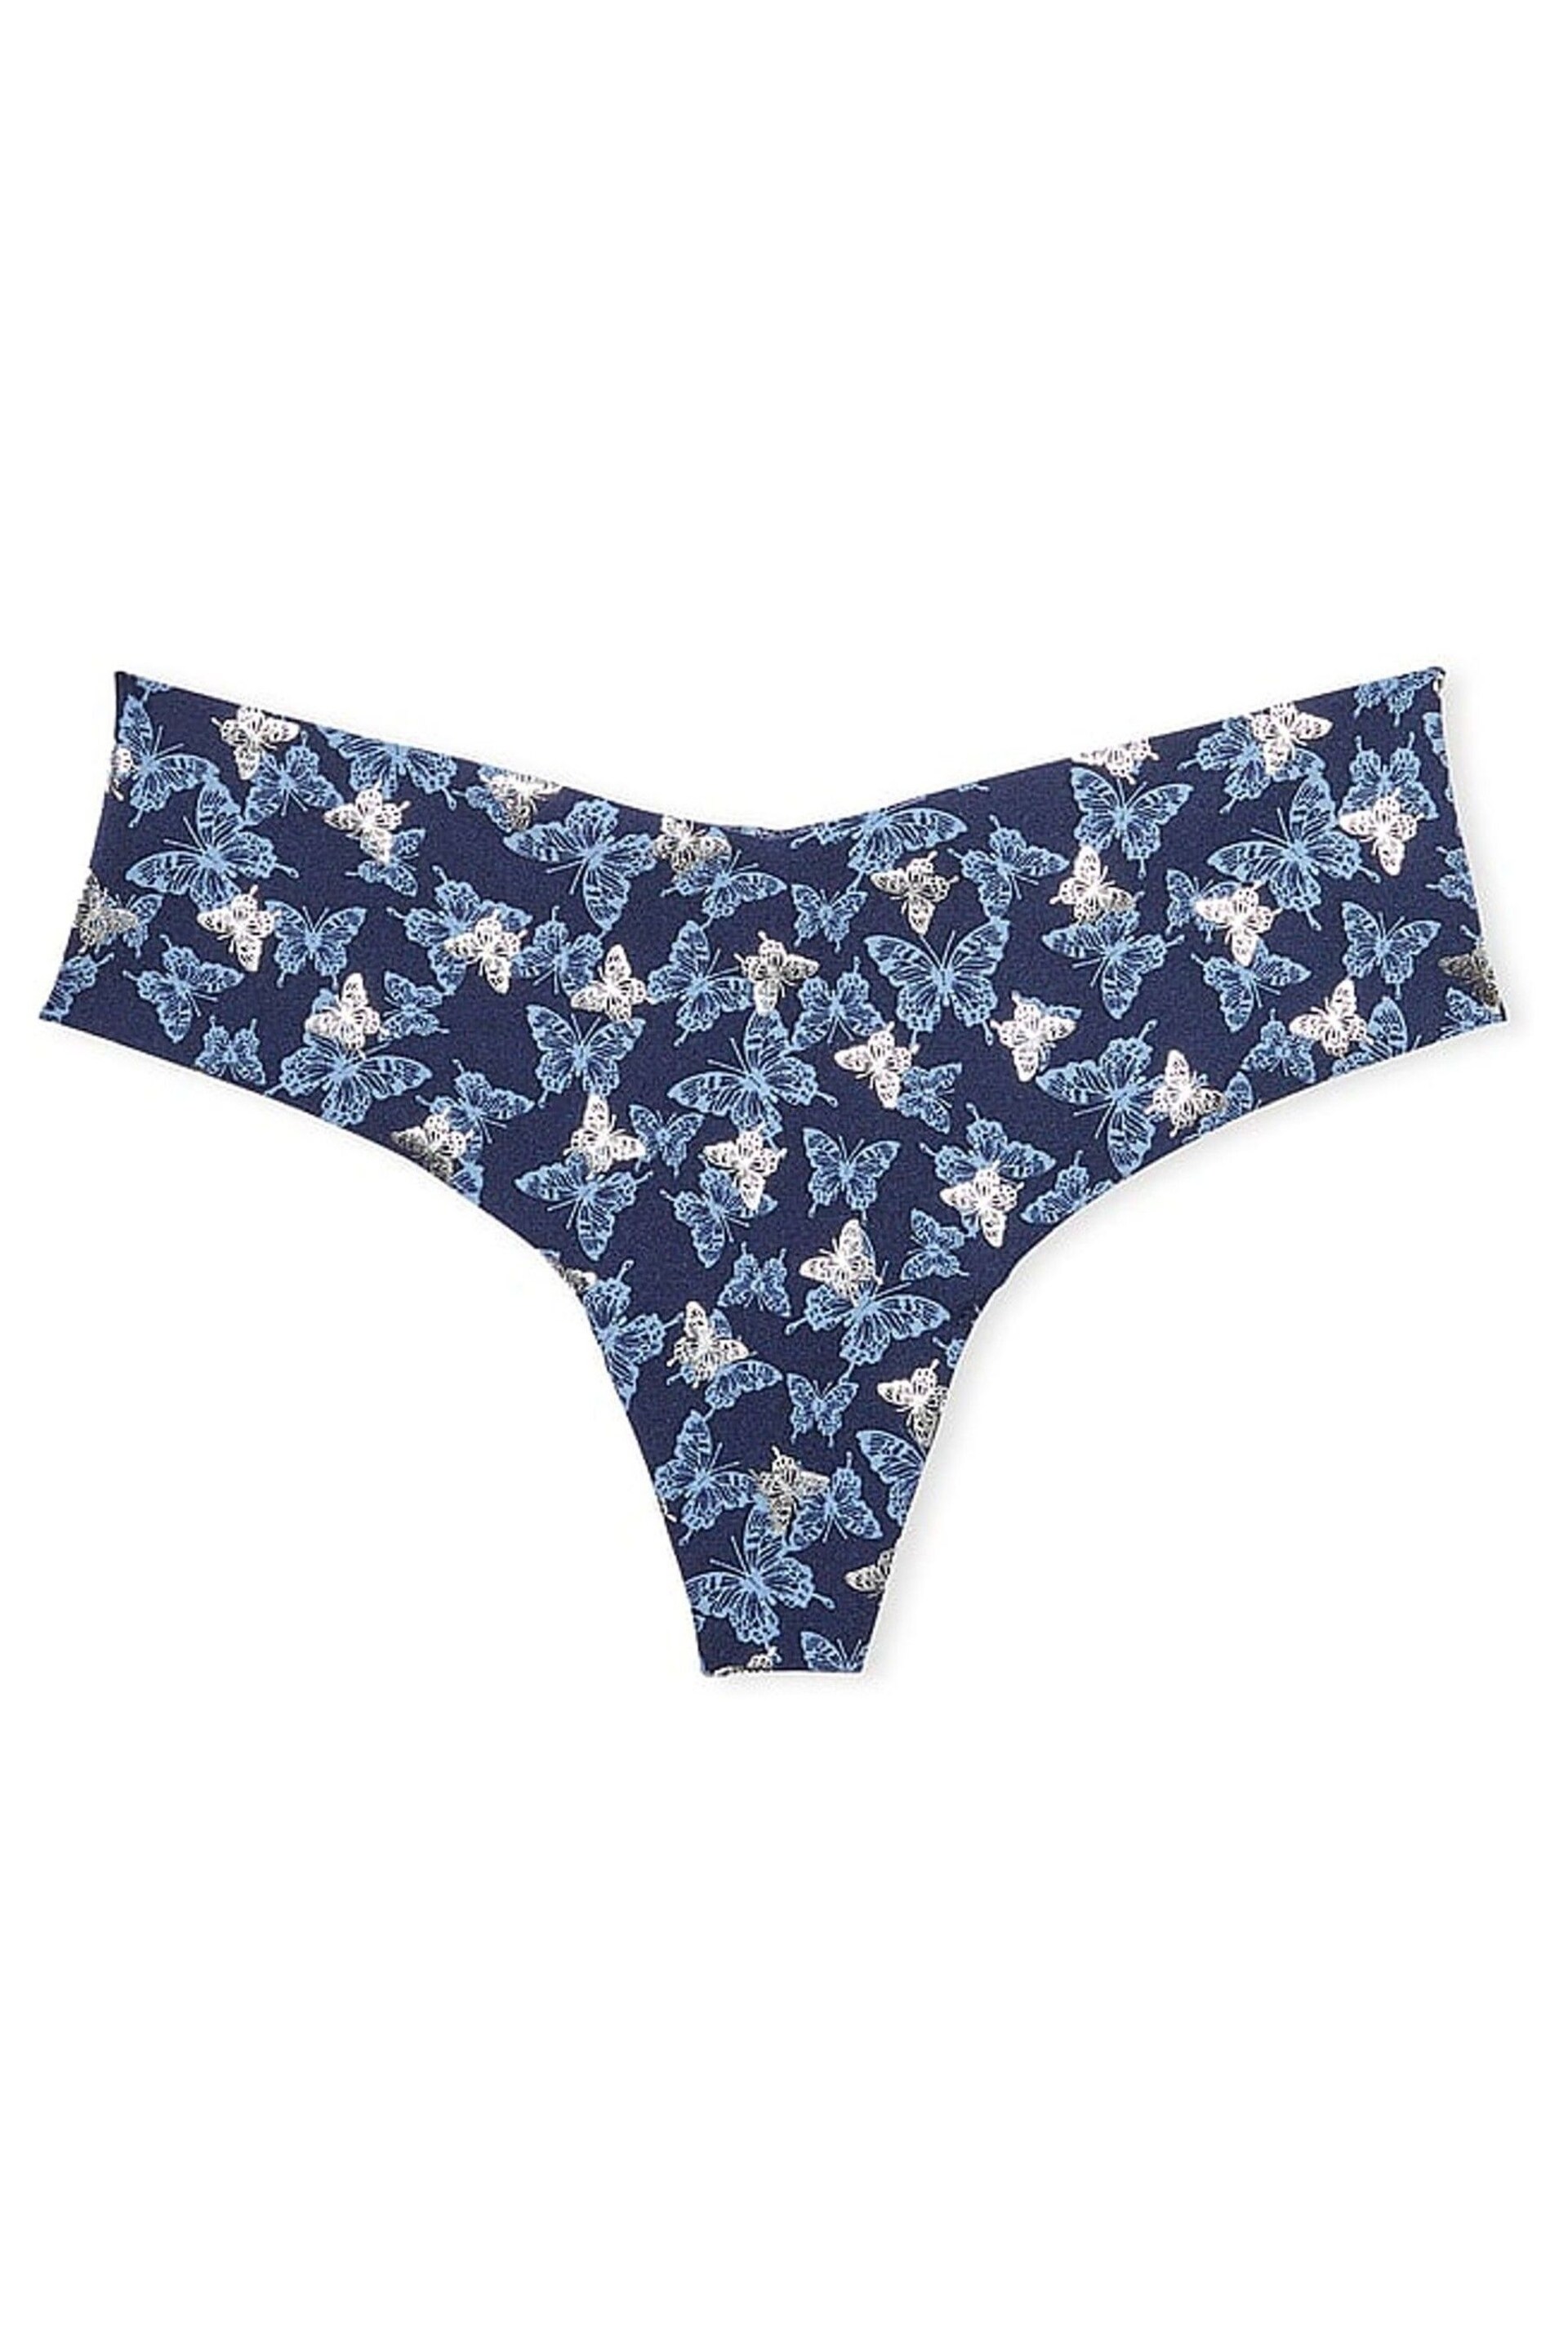 Victoria's Secret Noir Navy Blue Butterfly Thong Knickers - Image 4 of 4